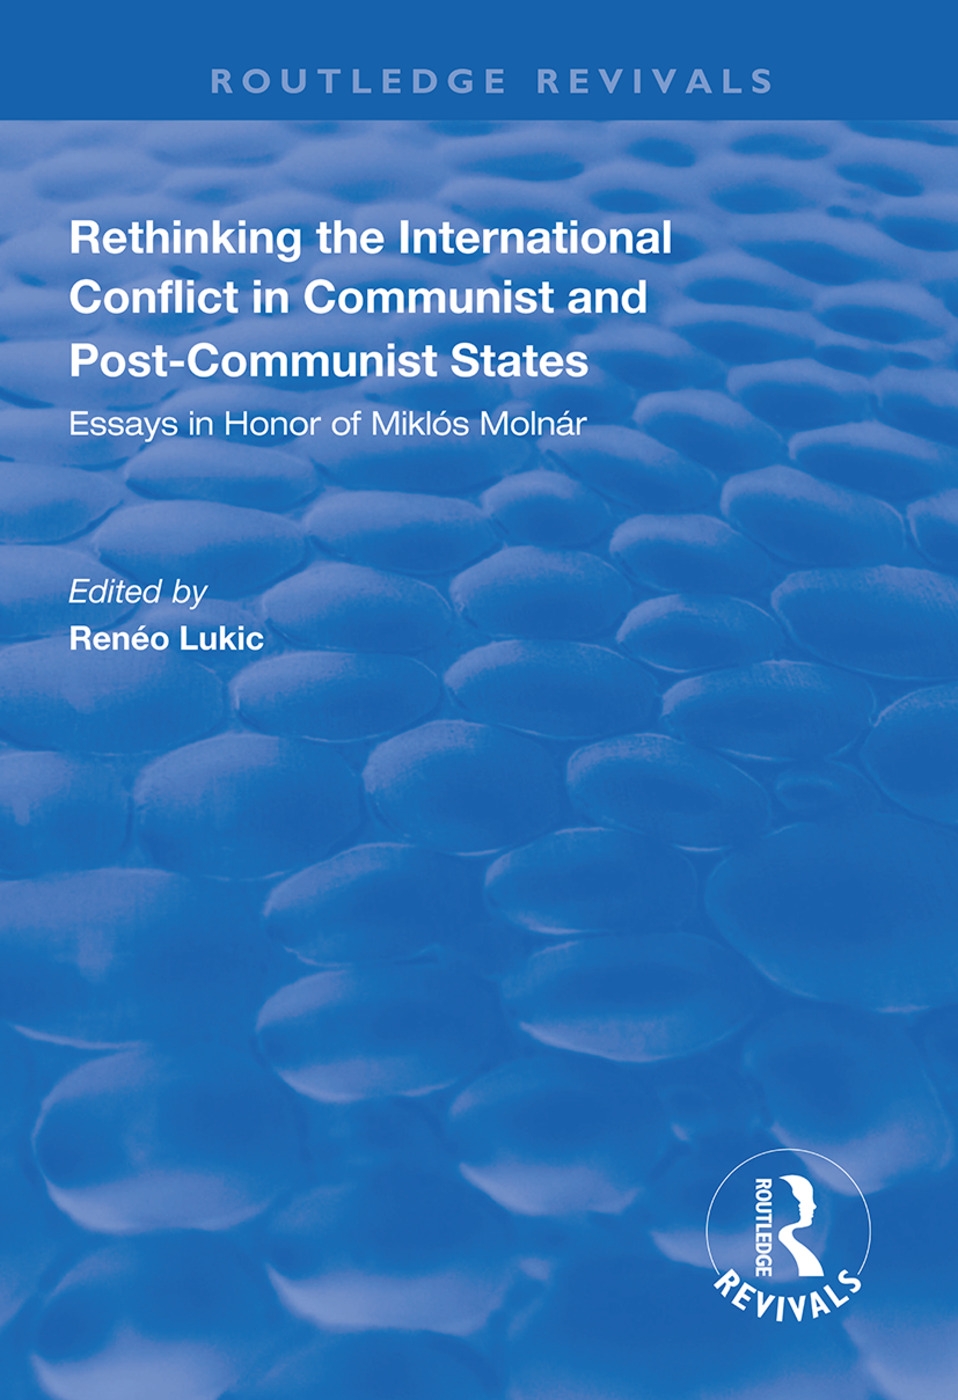 Rethinking the International Conflict in Communist and Post-Communist States: Essays in Honour of Miklos Molnar